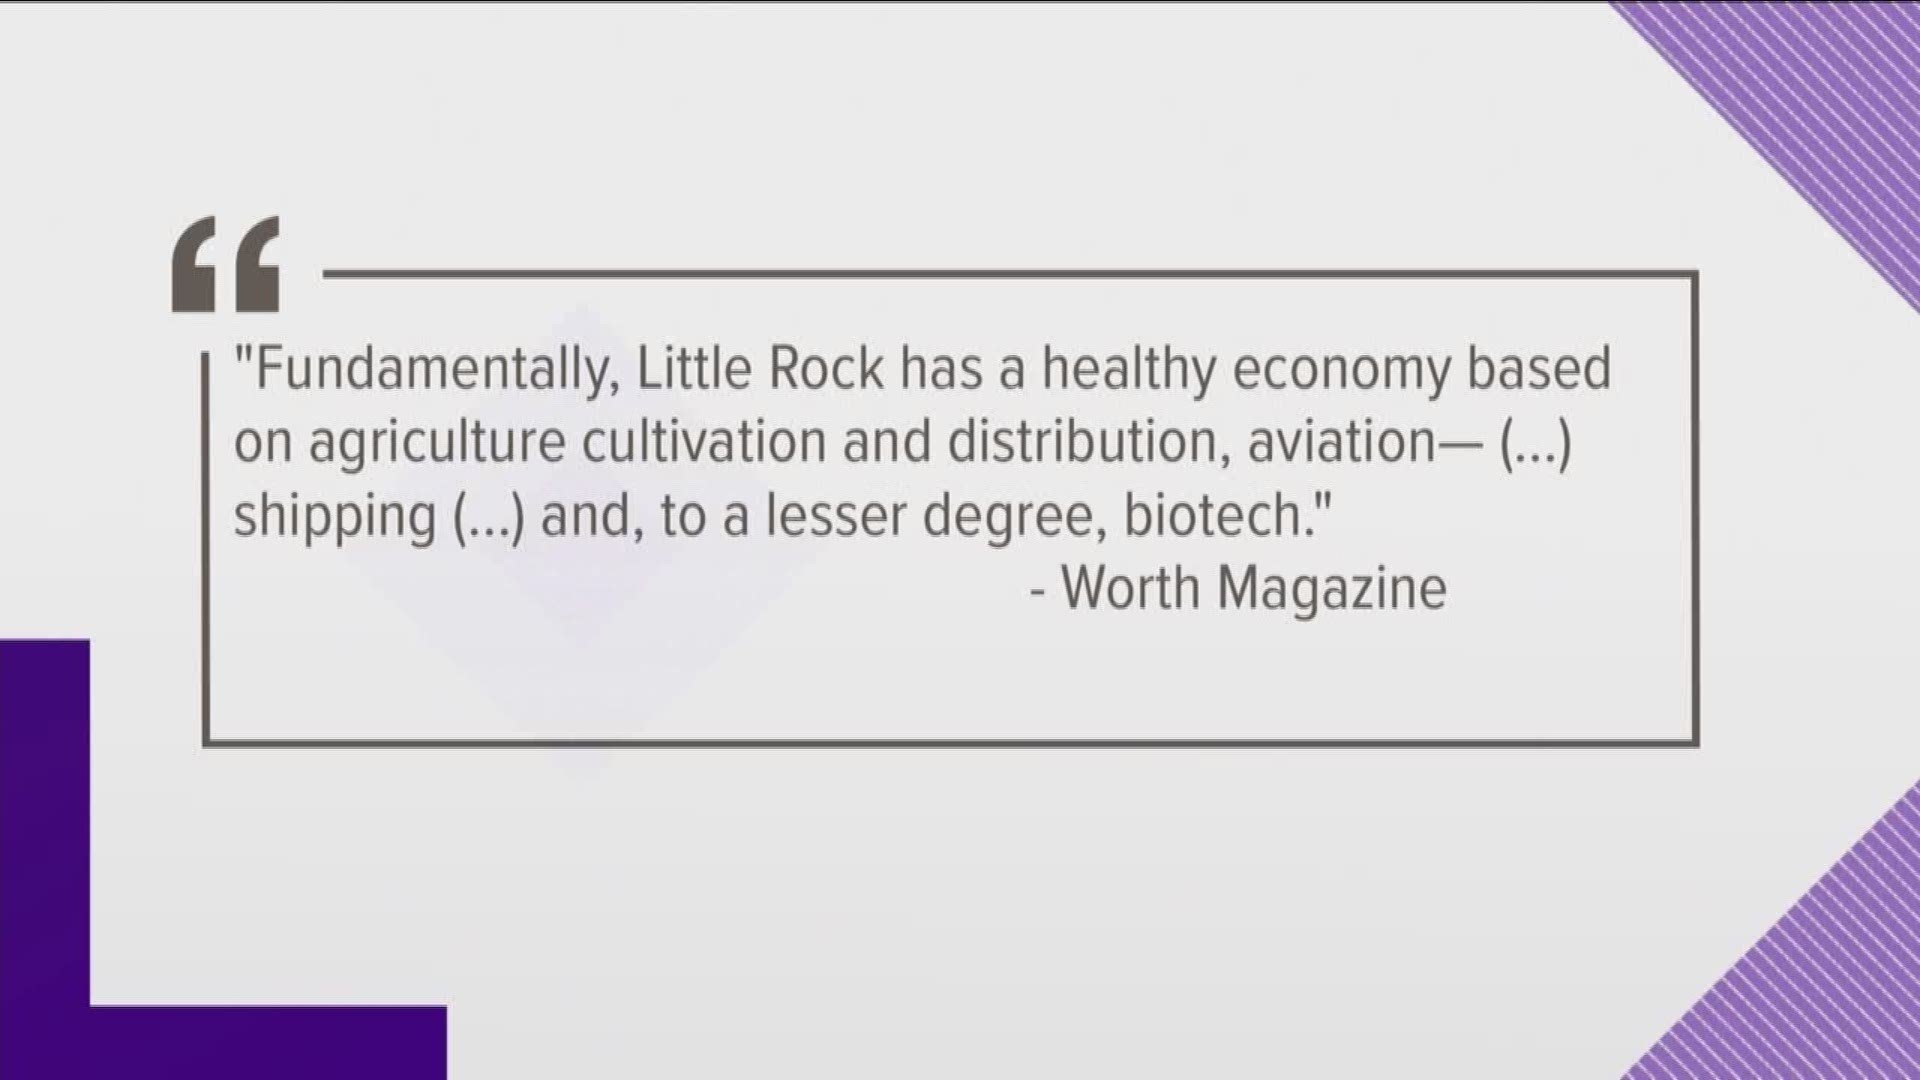 Not only did Little Rock make a good list, but the article highlights what the city does right.